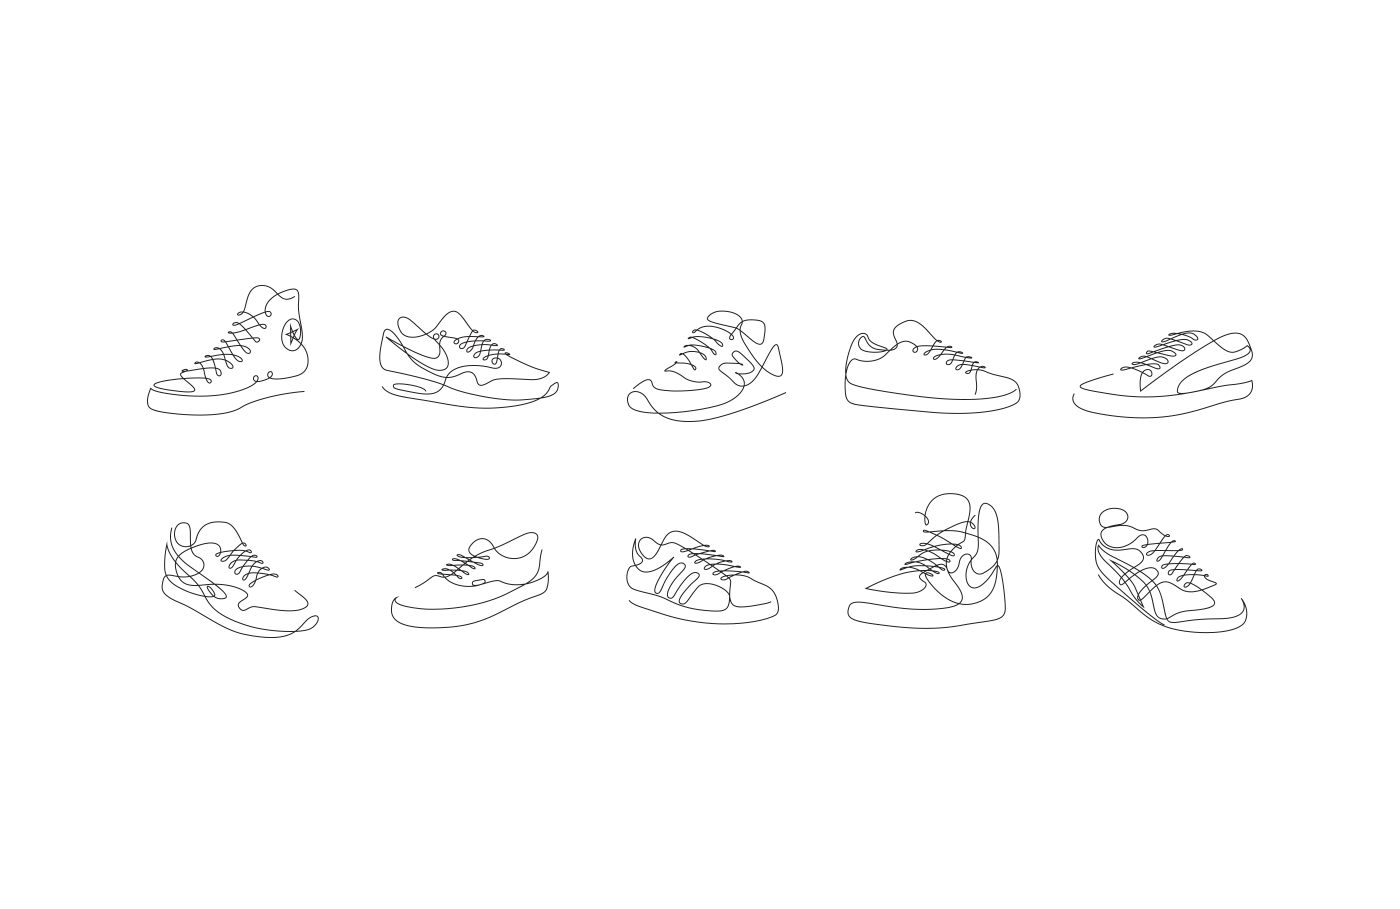 shoes sneakers continuous line Nike adidas puma Asics converse oneline lineart